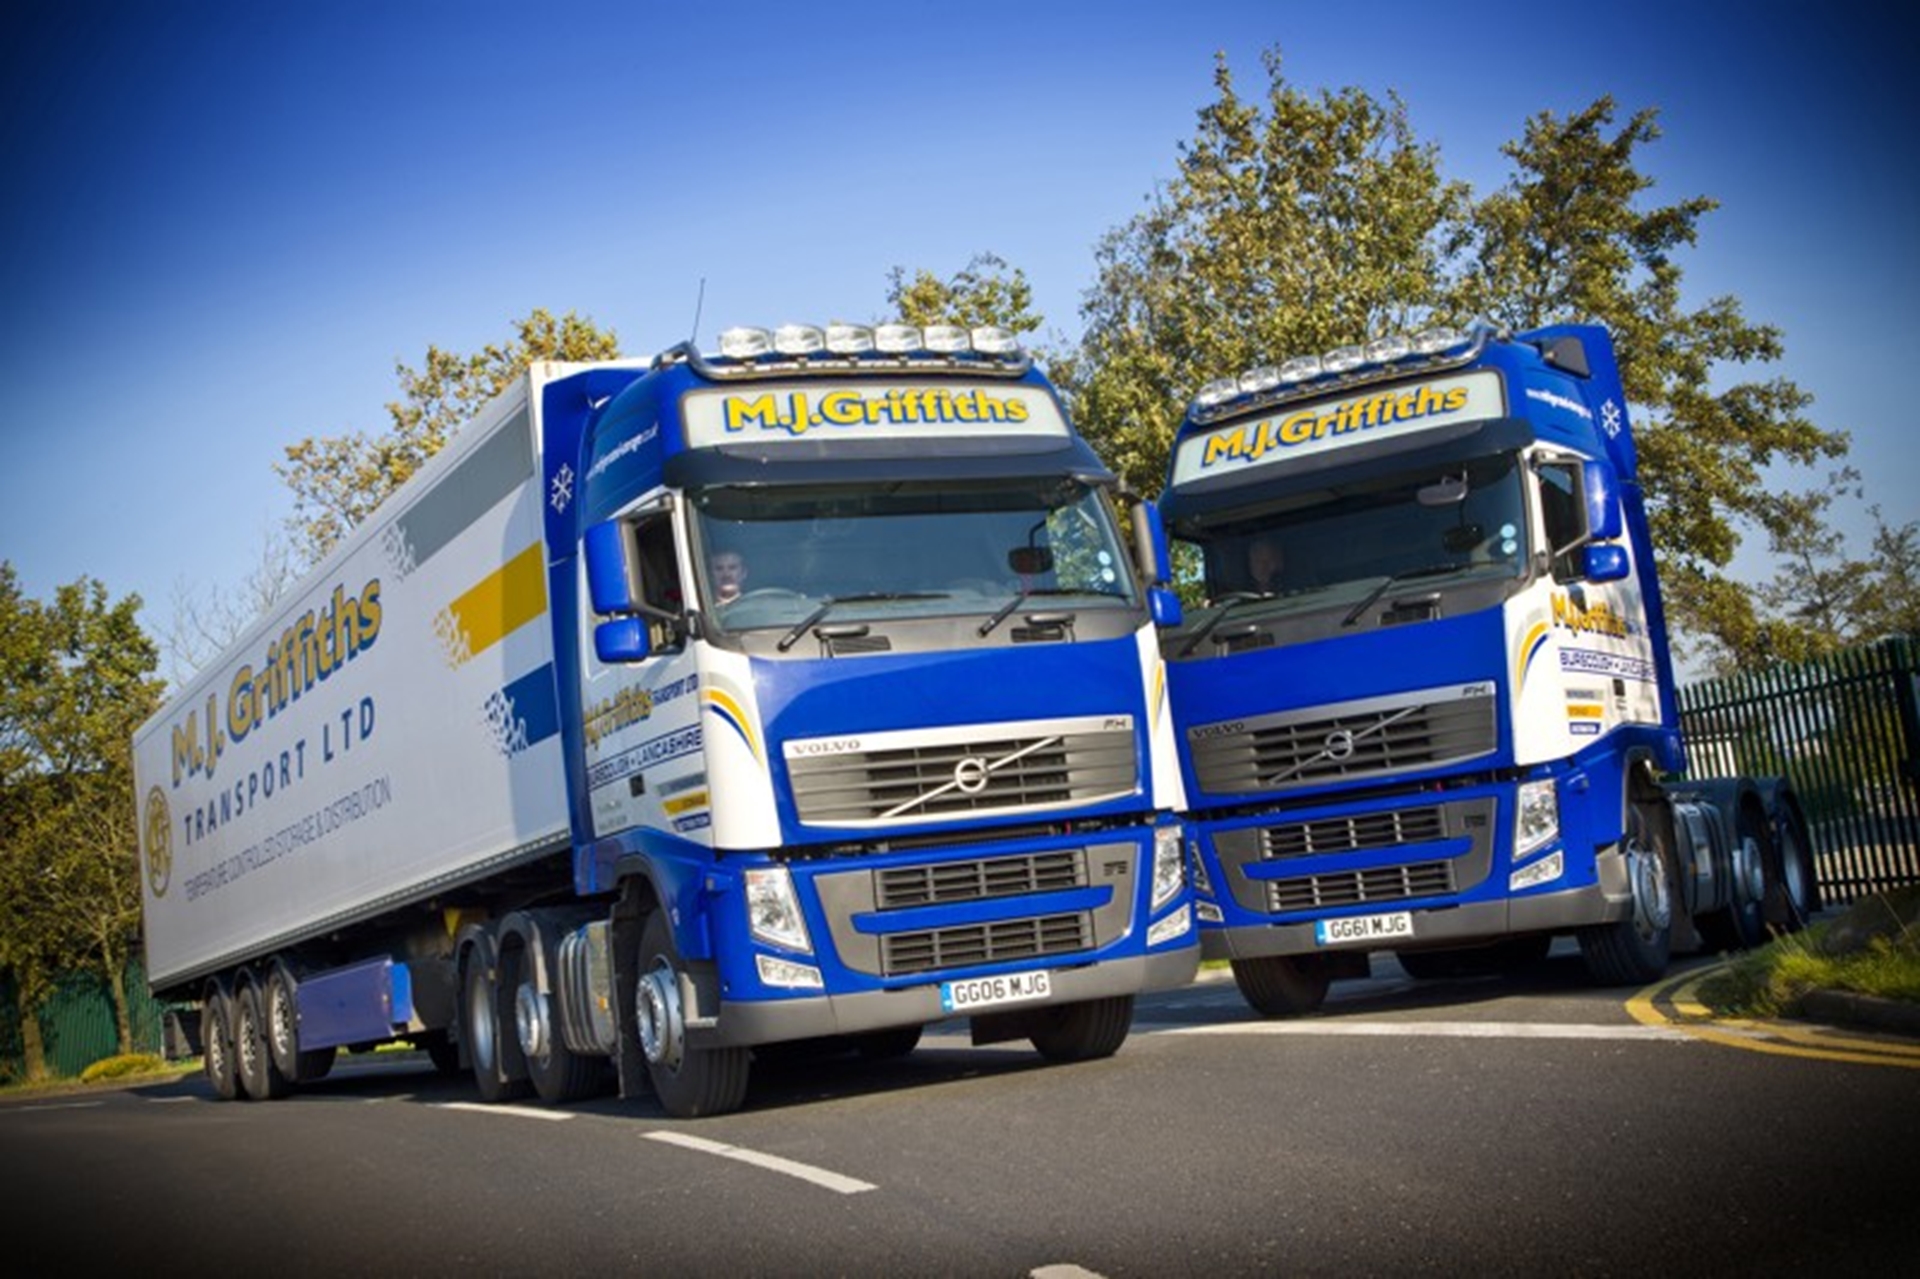 FIRST EVER VOLVOS WIN ON FUEL FOR M J GRIFFITHS TRANSPORT